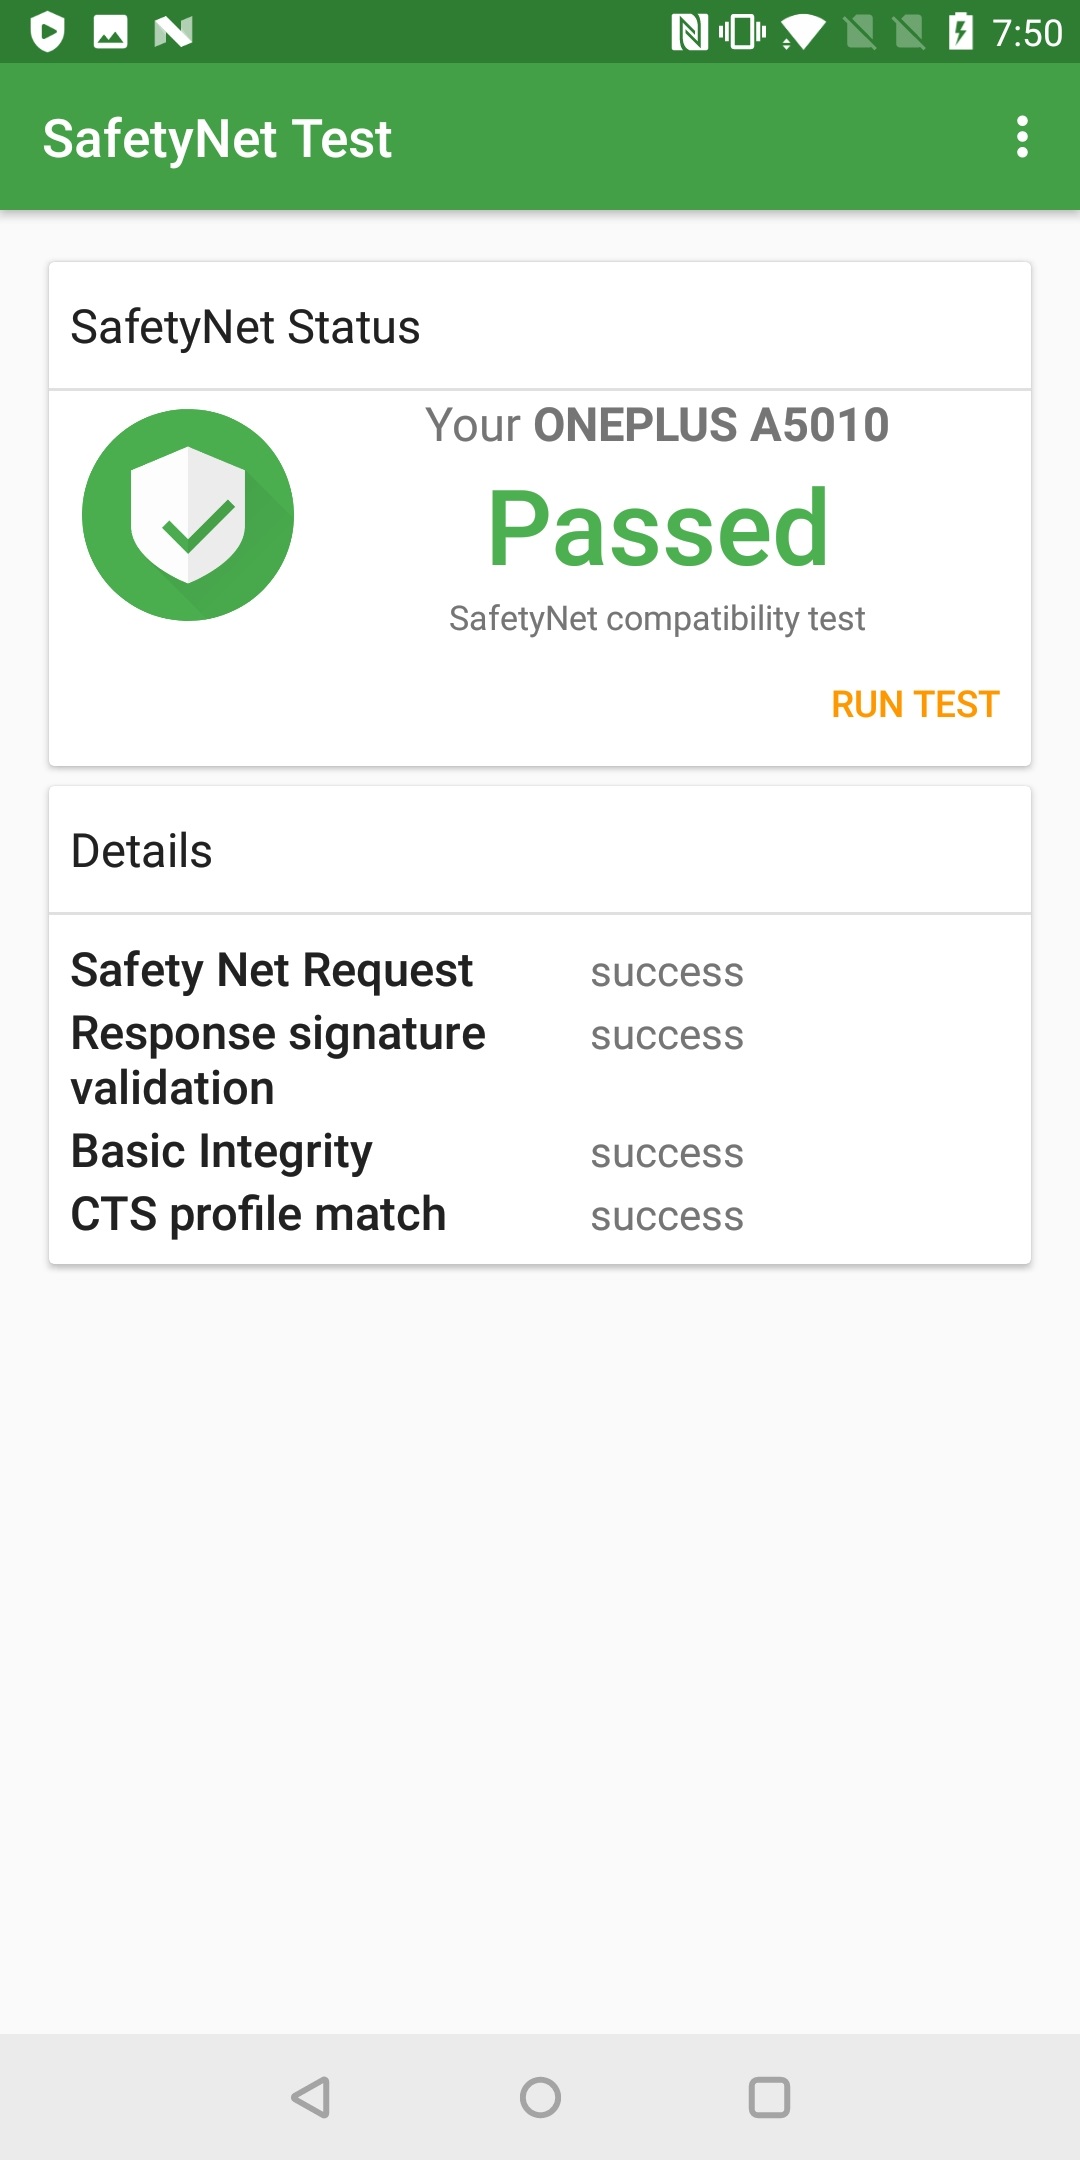 SafetyNet basic and CTS pass